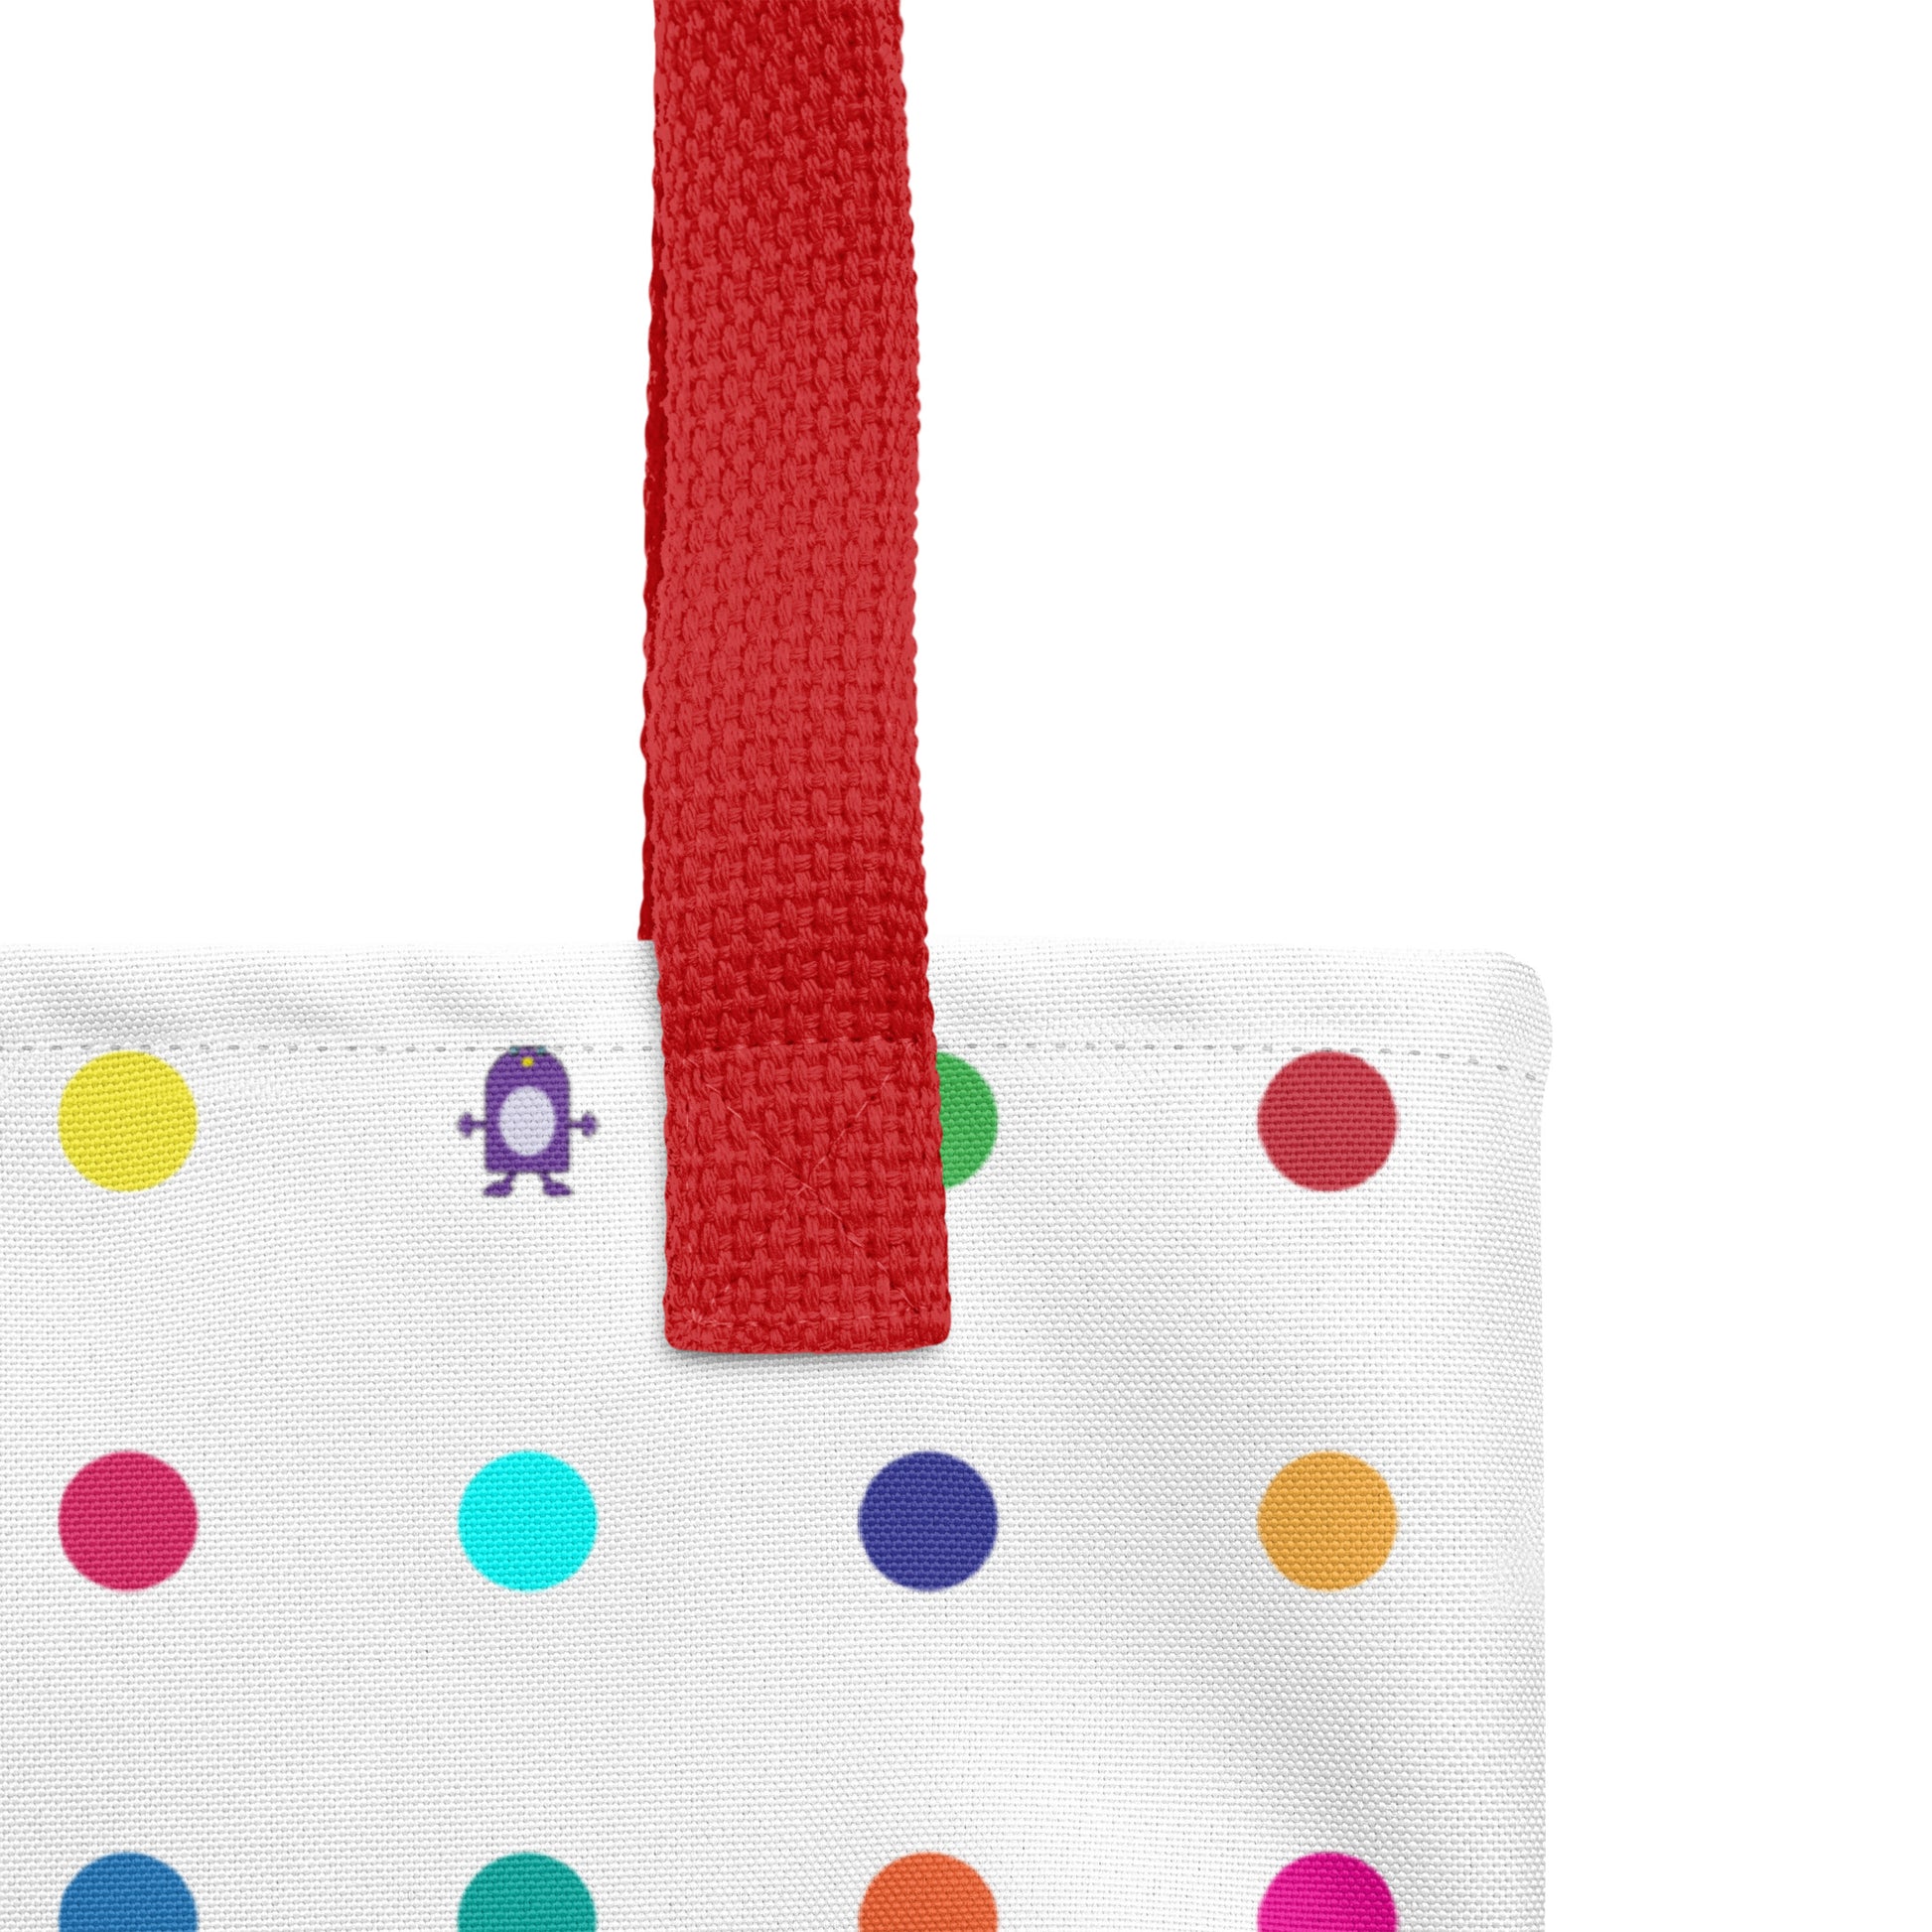 Medium dot and monster white Tote bag red handle